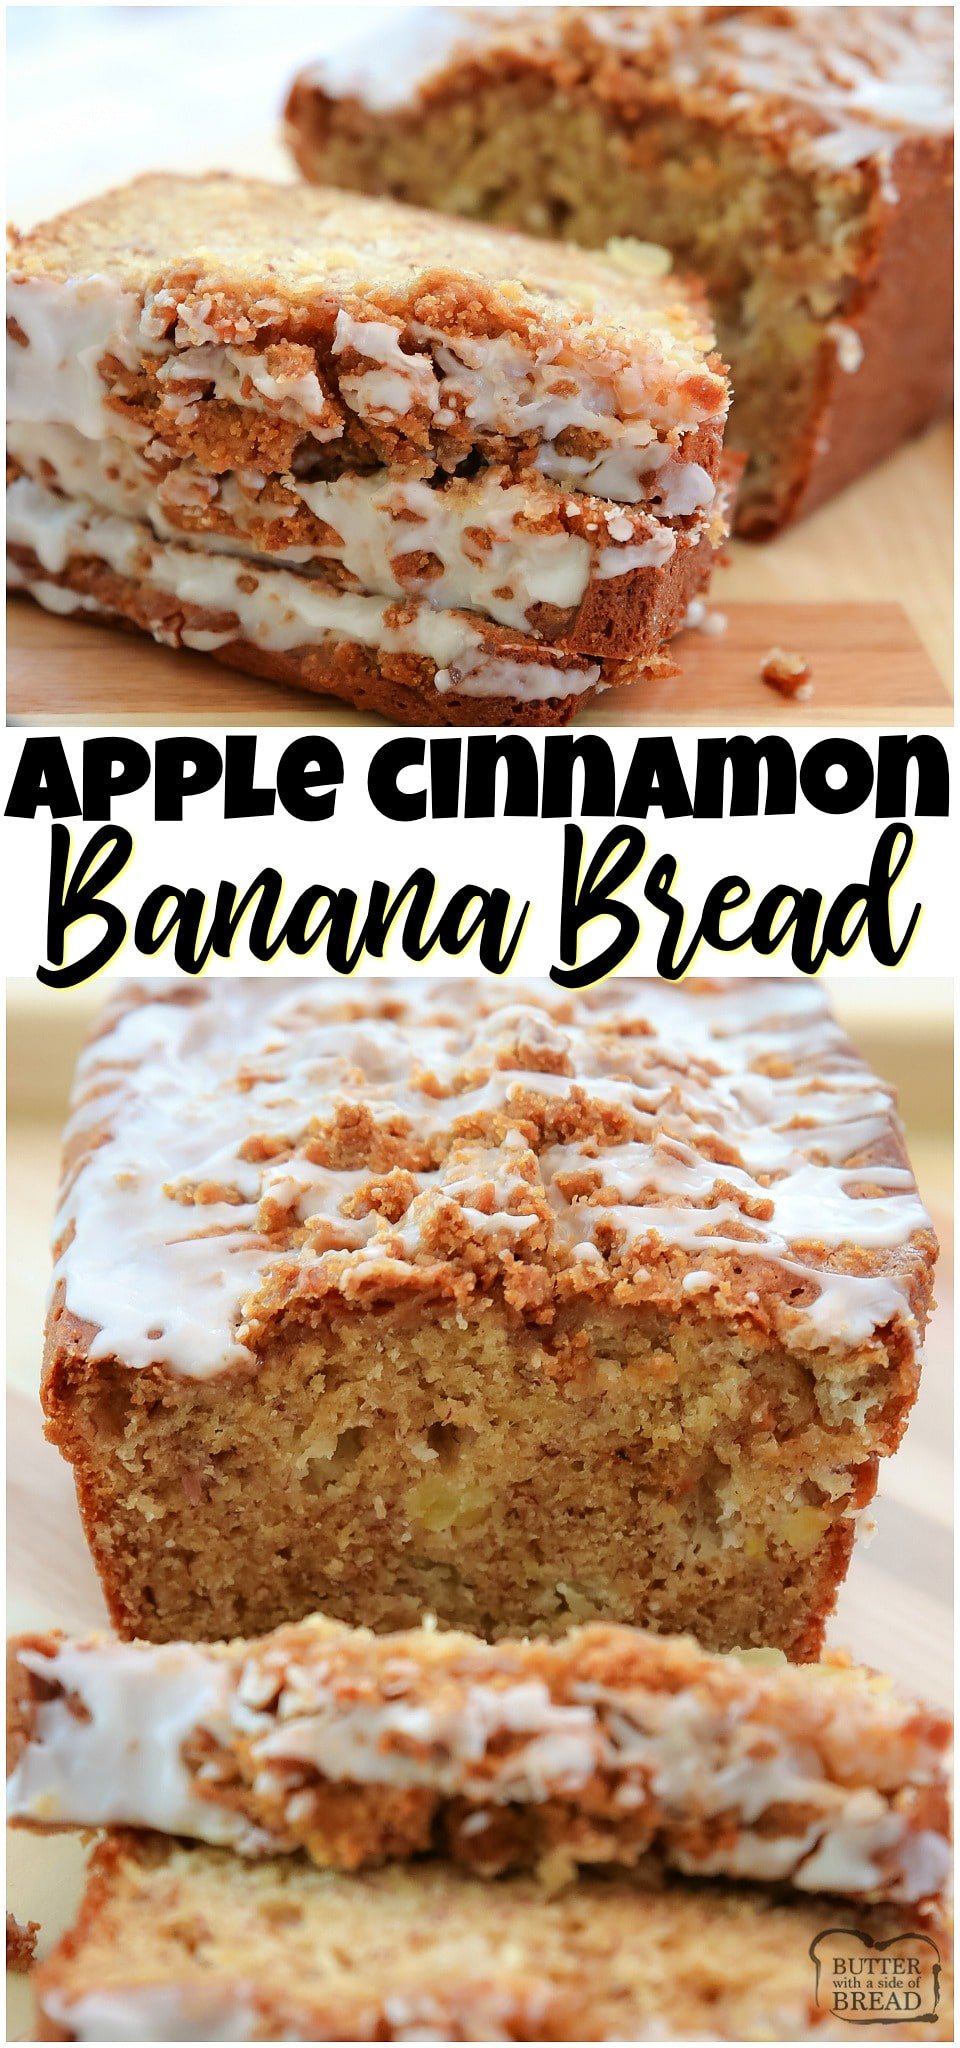 Apple Banana Bread made with ripe bananas and diced sweet apple, topped with a cinnamon streusel and drizzled with icing. Our favorite banana bread recipe ever!